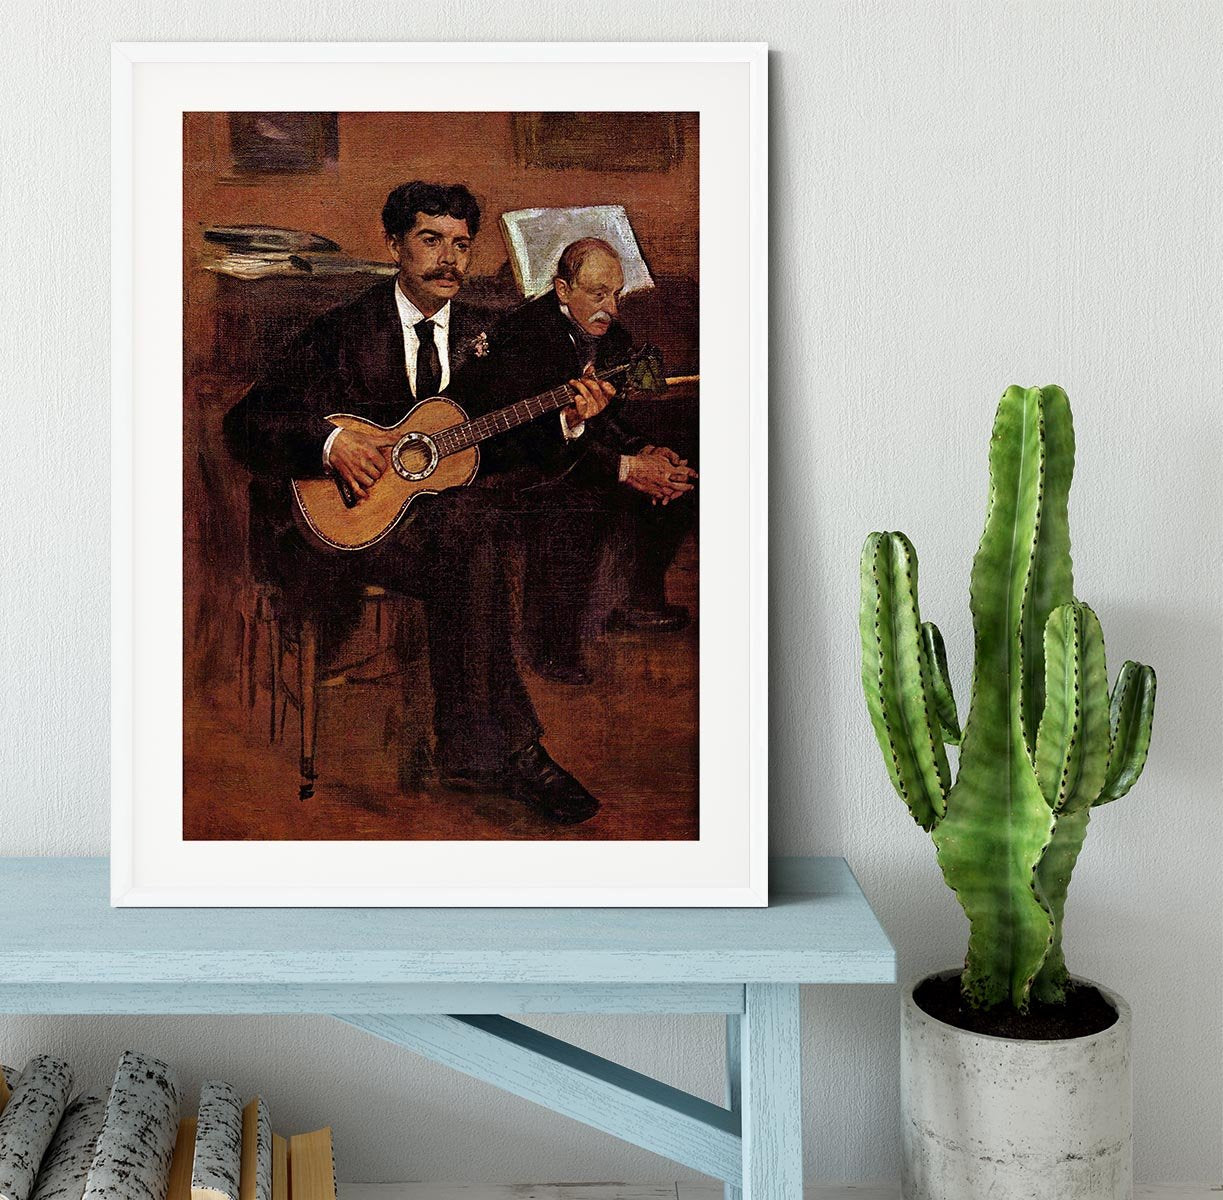 The guitarist Pagans and Monsieur Degas by Manet Framed Print - Canvas Art Rocks - 5